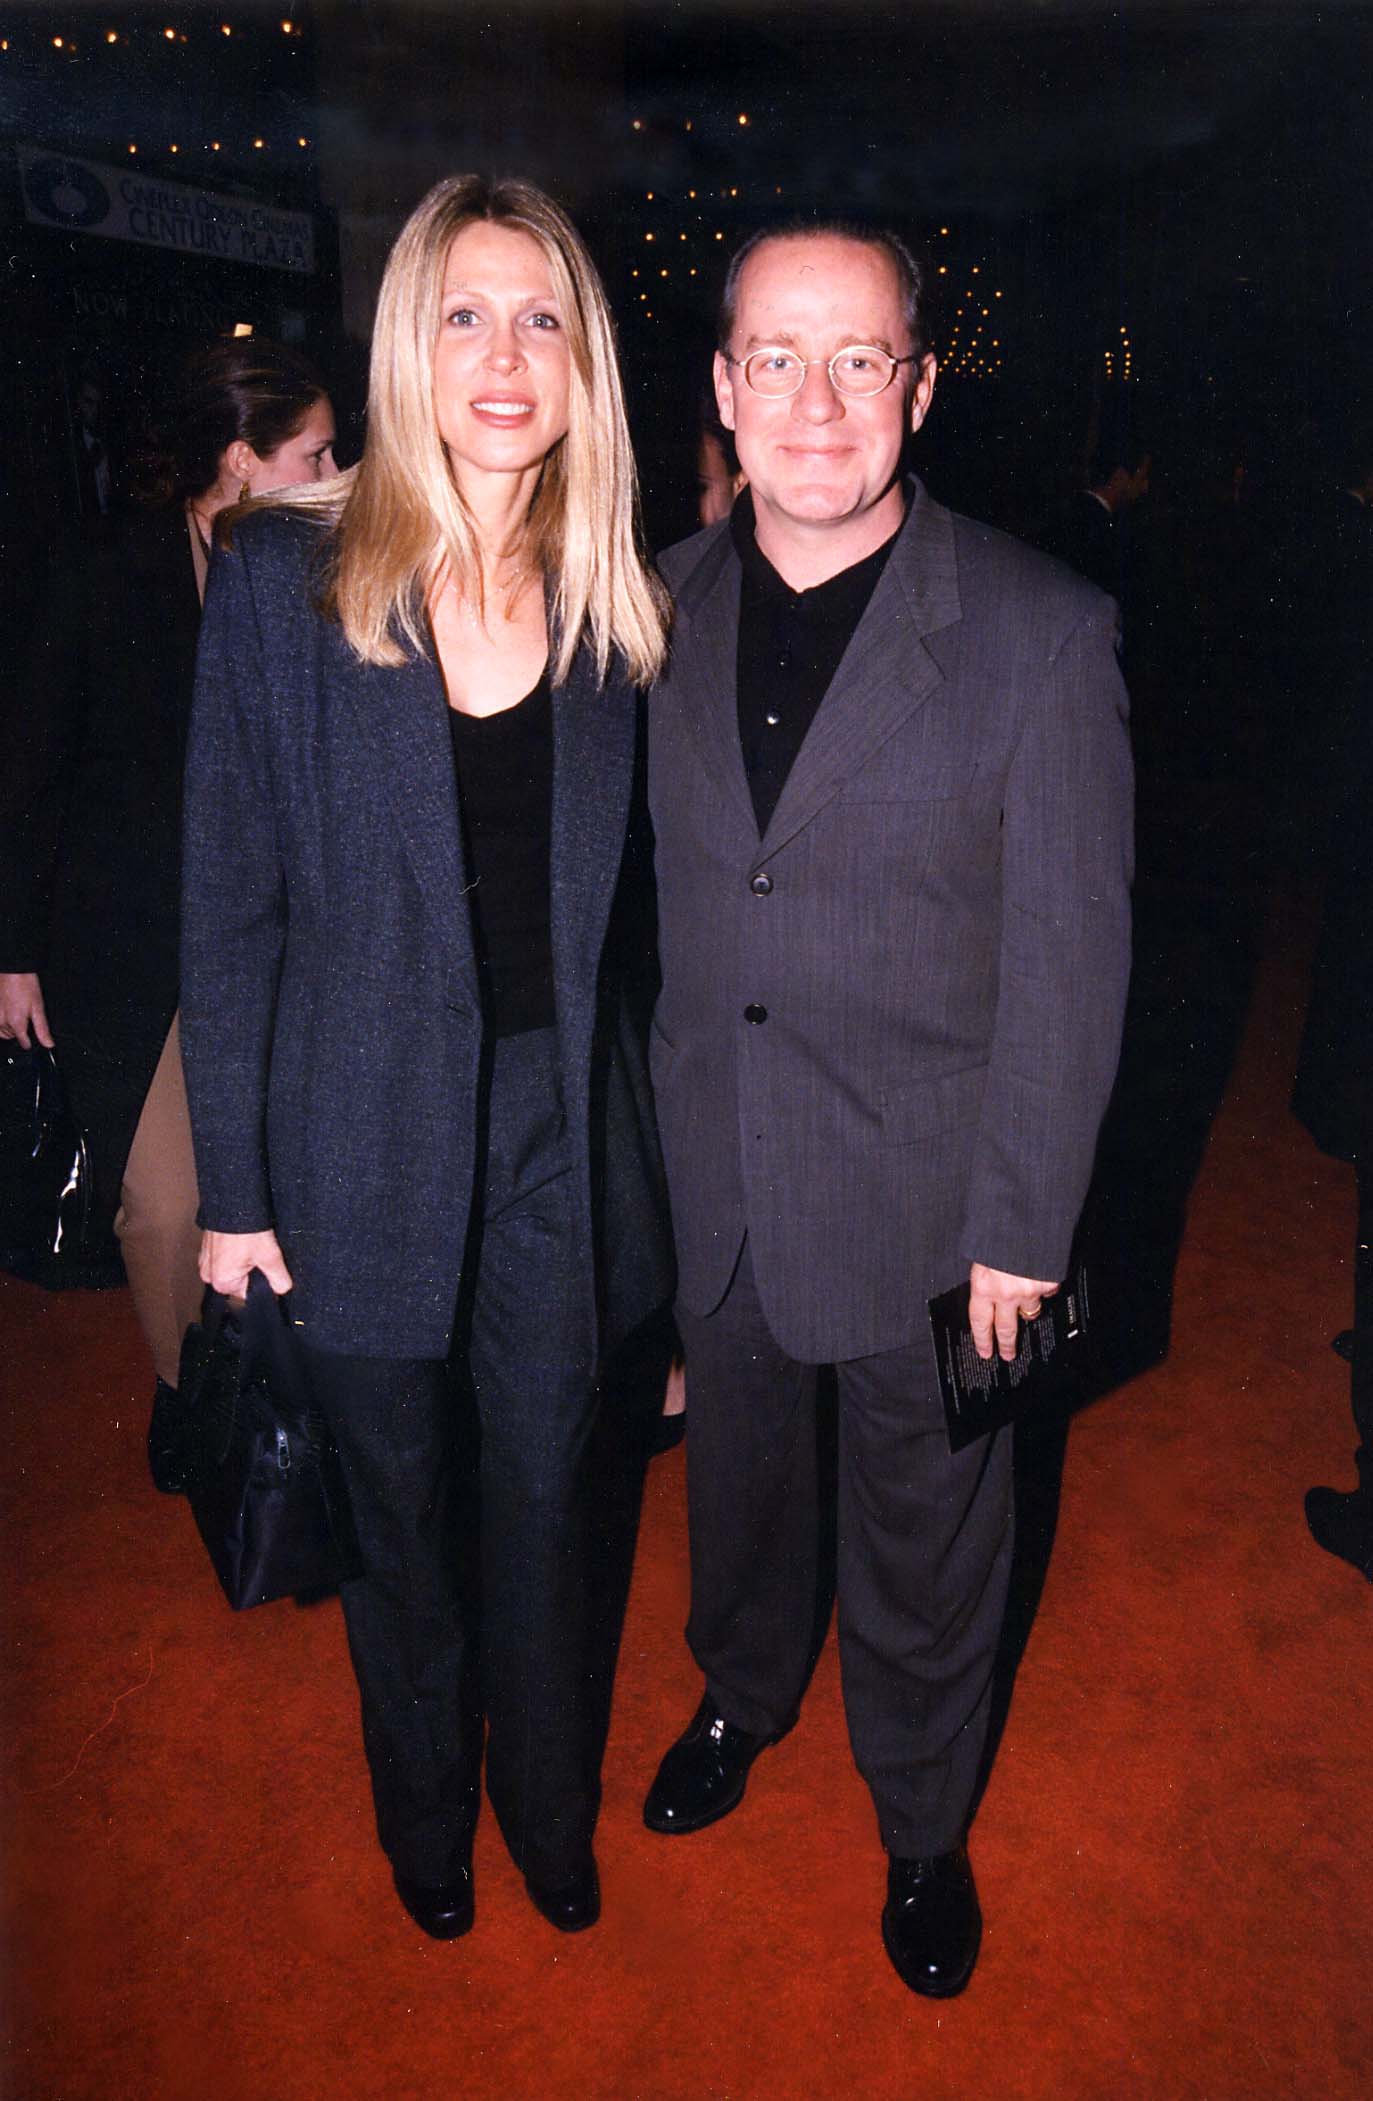 Phil and Brynn Hartman at the premiere of "From the Earth to the Moon" in 1998 in Los Angeles | Source: Getty Images